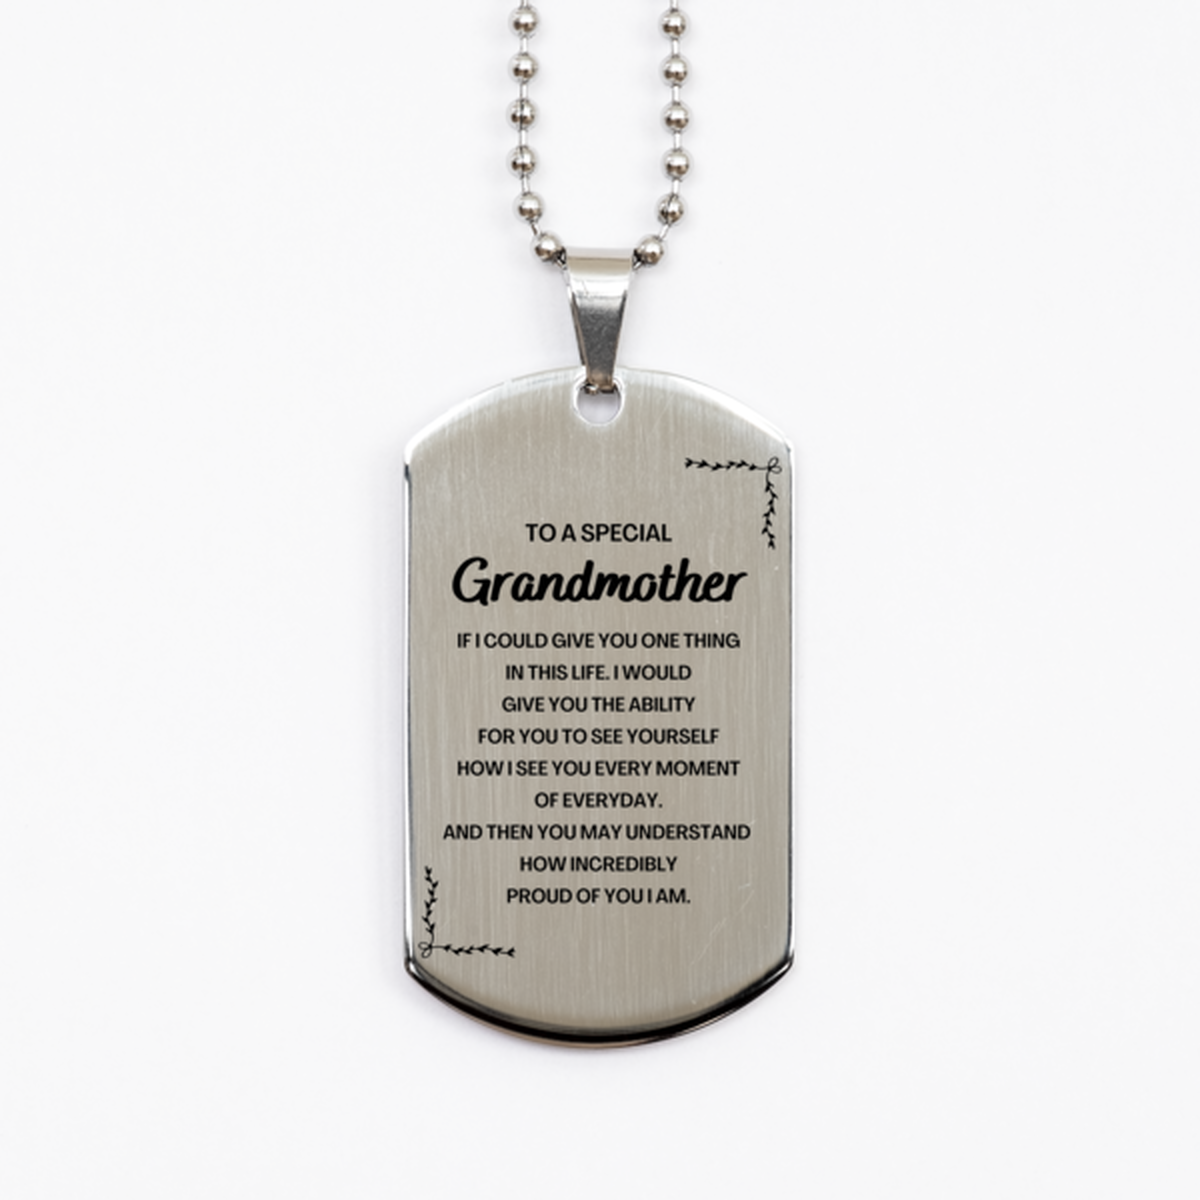 To My Grandmother Silver Dog Tag, Gifts For Grandmother Engraved, Inspirational Gifts for Christmas Birthday, Epic Gifts for Grandmother To A Special Grandmother how incredibly proud of you I am